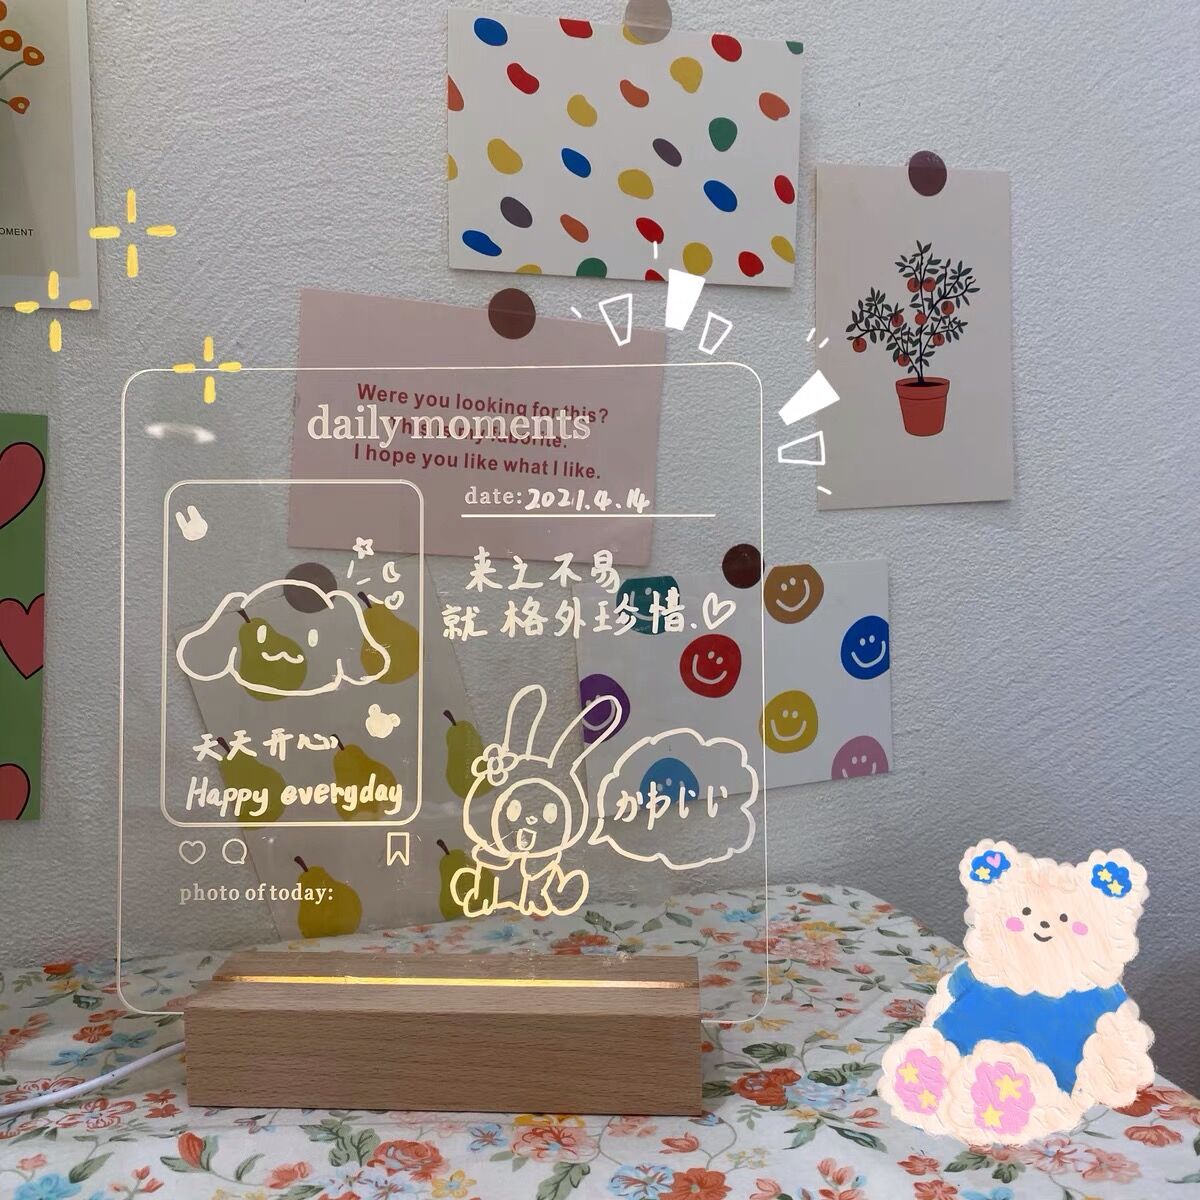 A playful and inviting LED memo board with handwritten notes and cute illustrations, illuminated by a soft backlight. The clear board is part of a cheerful room setup, complete with colorful wall decorations and a plush toy, radiating a joyful and welcoming atmosphere.